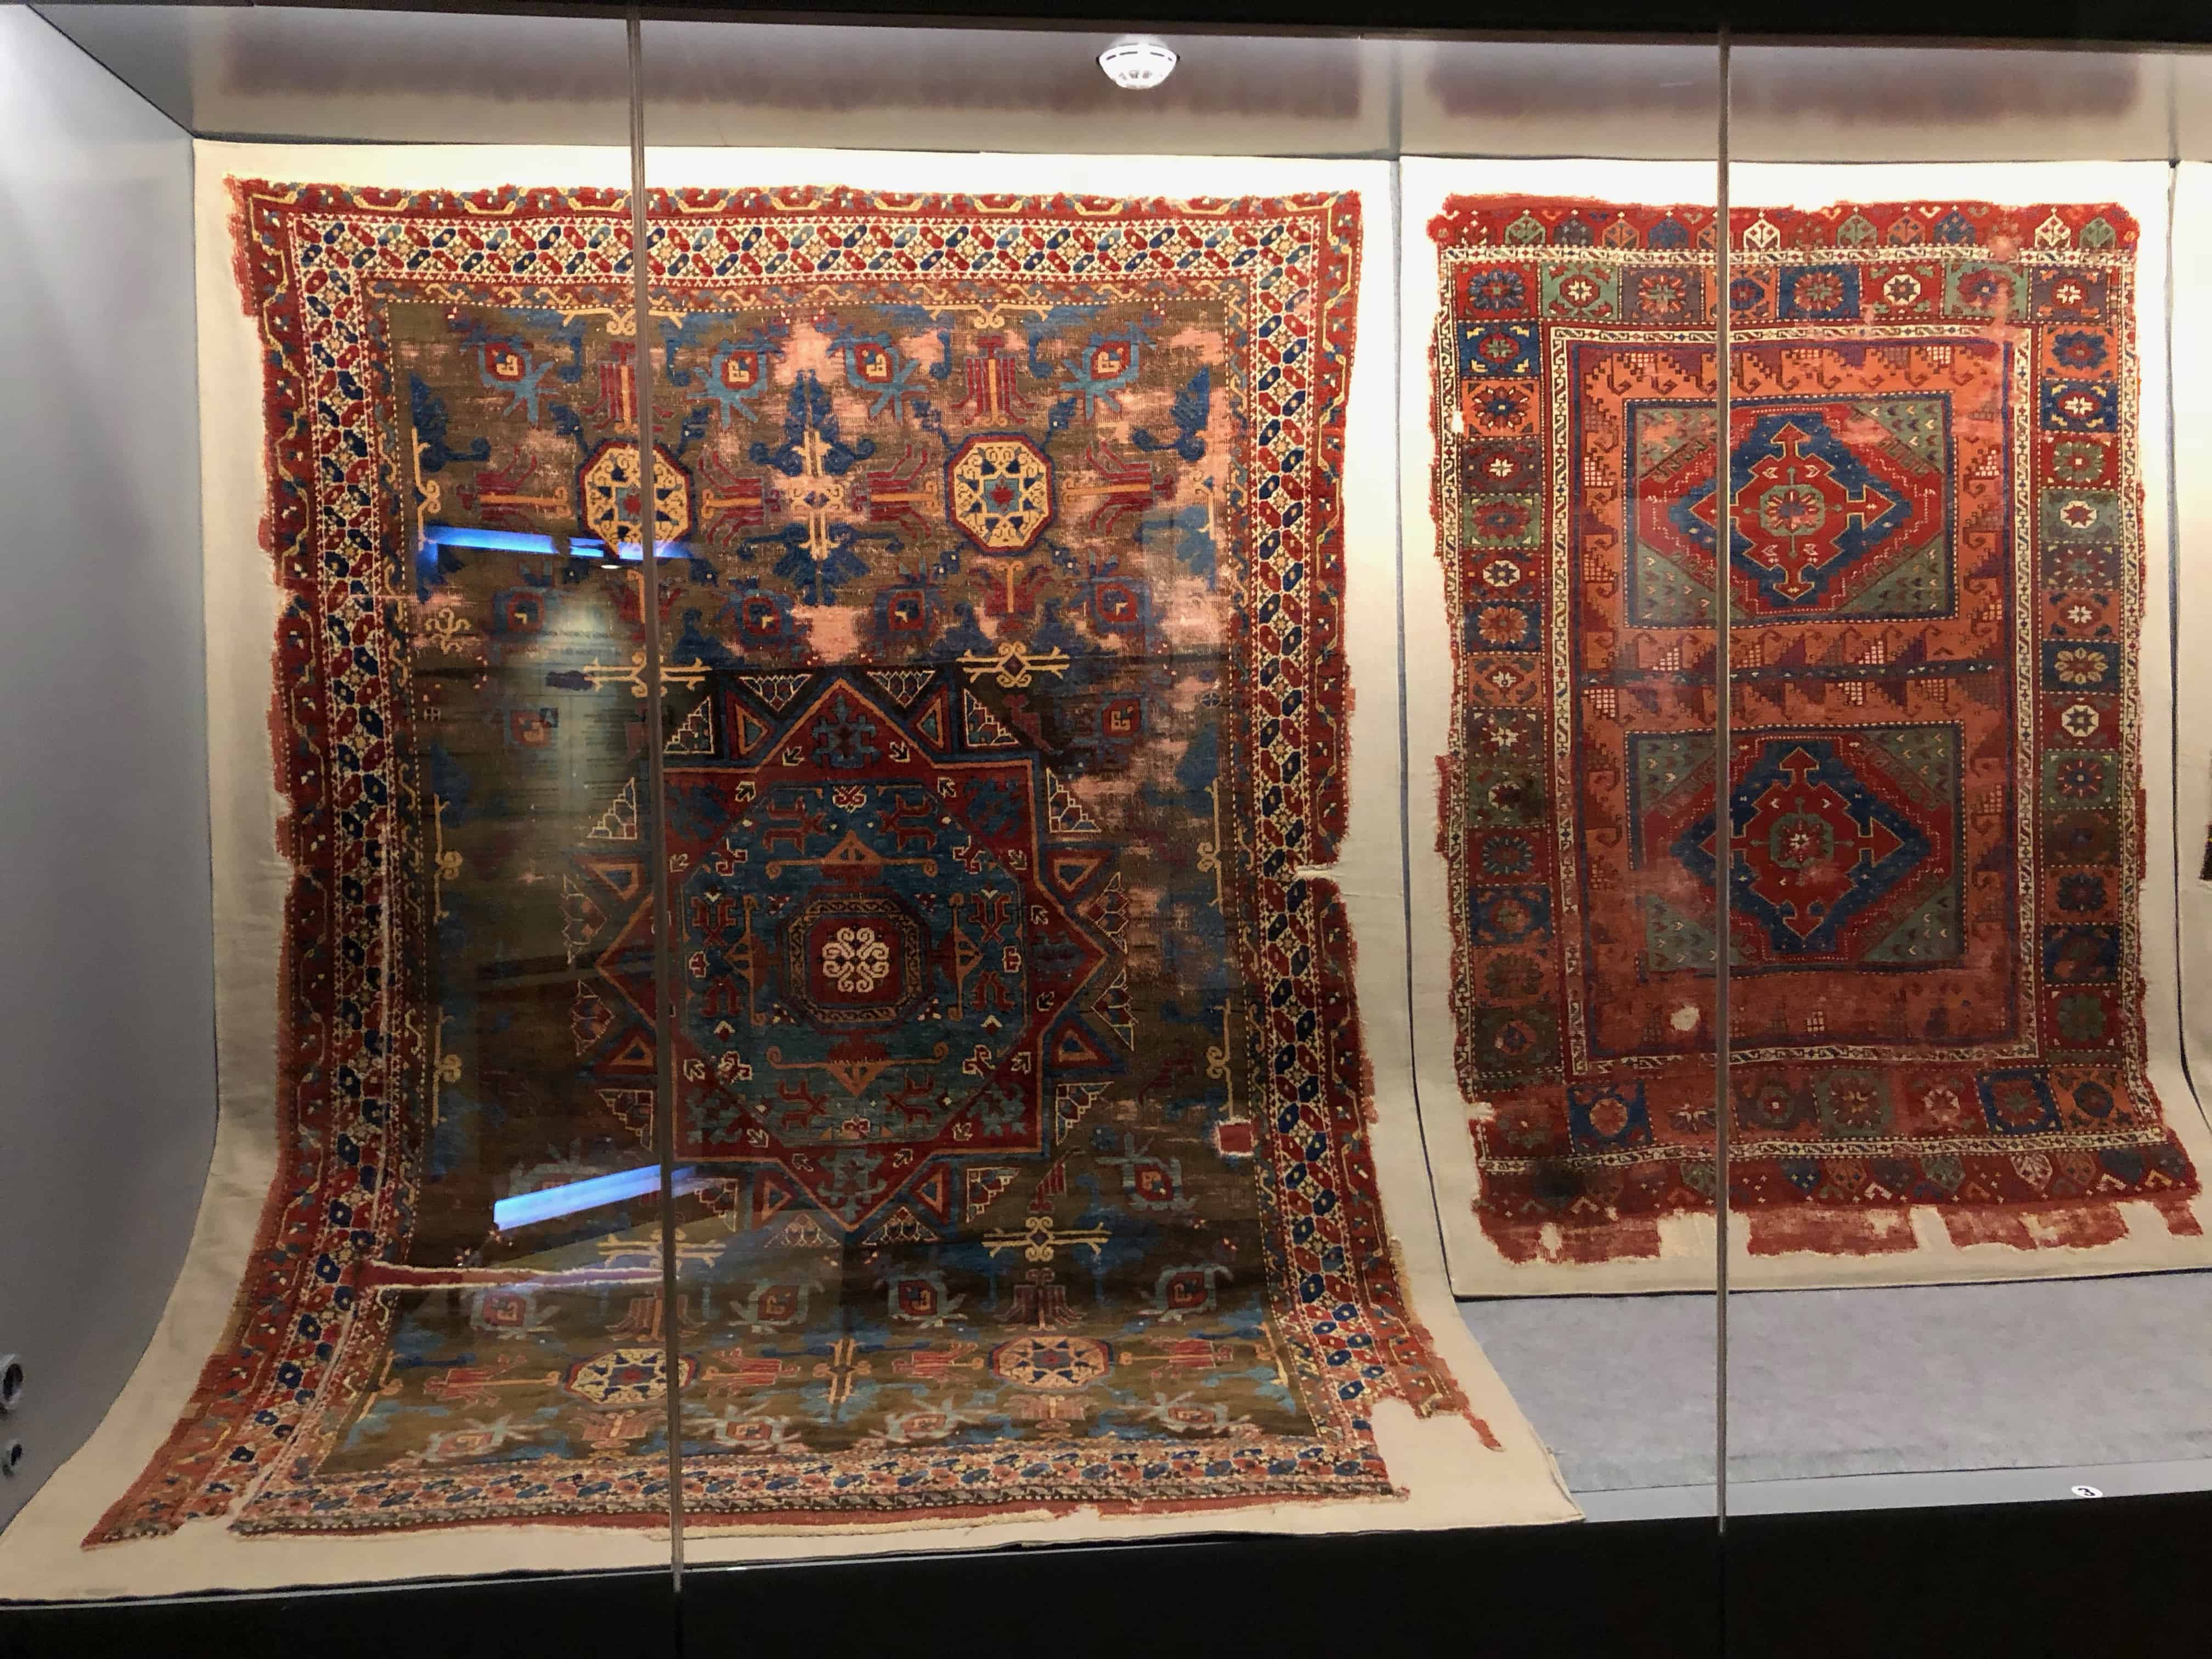 Carpets in the first gallery at the Carpet Museum in Istanbul, Turkey